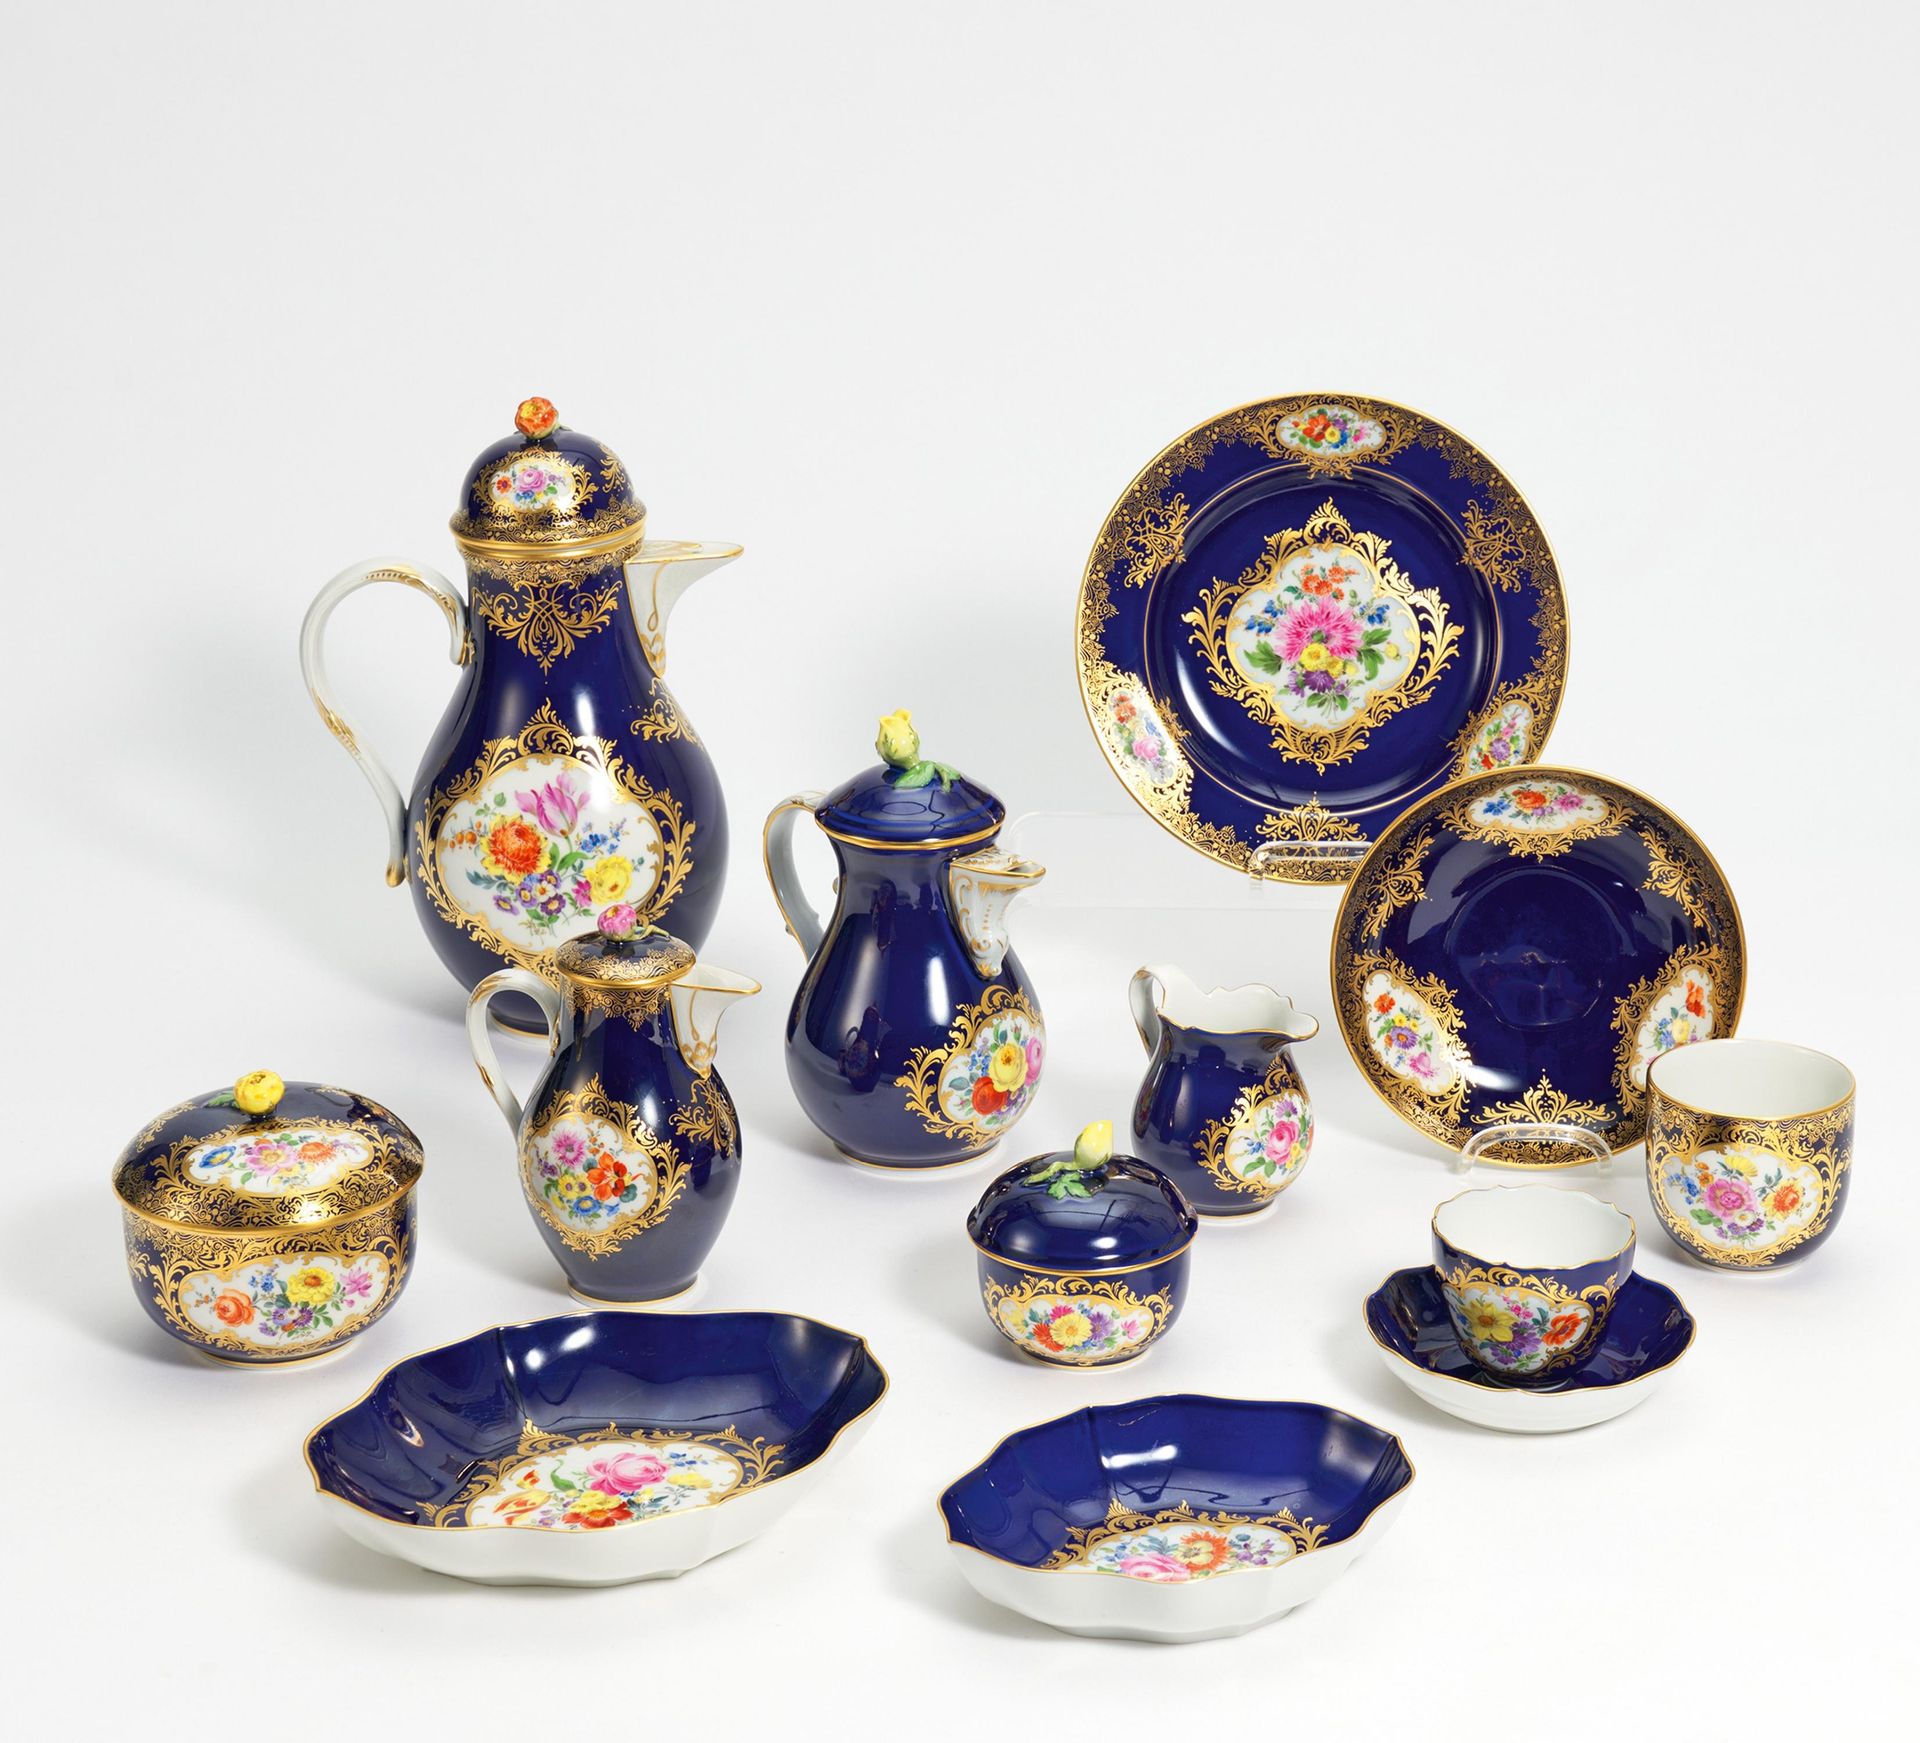 PORCELAIN MOCHA AND COFFEE SERVICE WITH COBALT BLUE FOND AND 